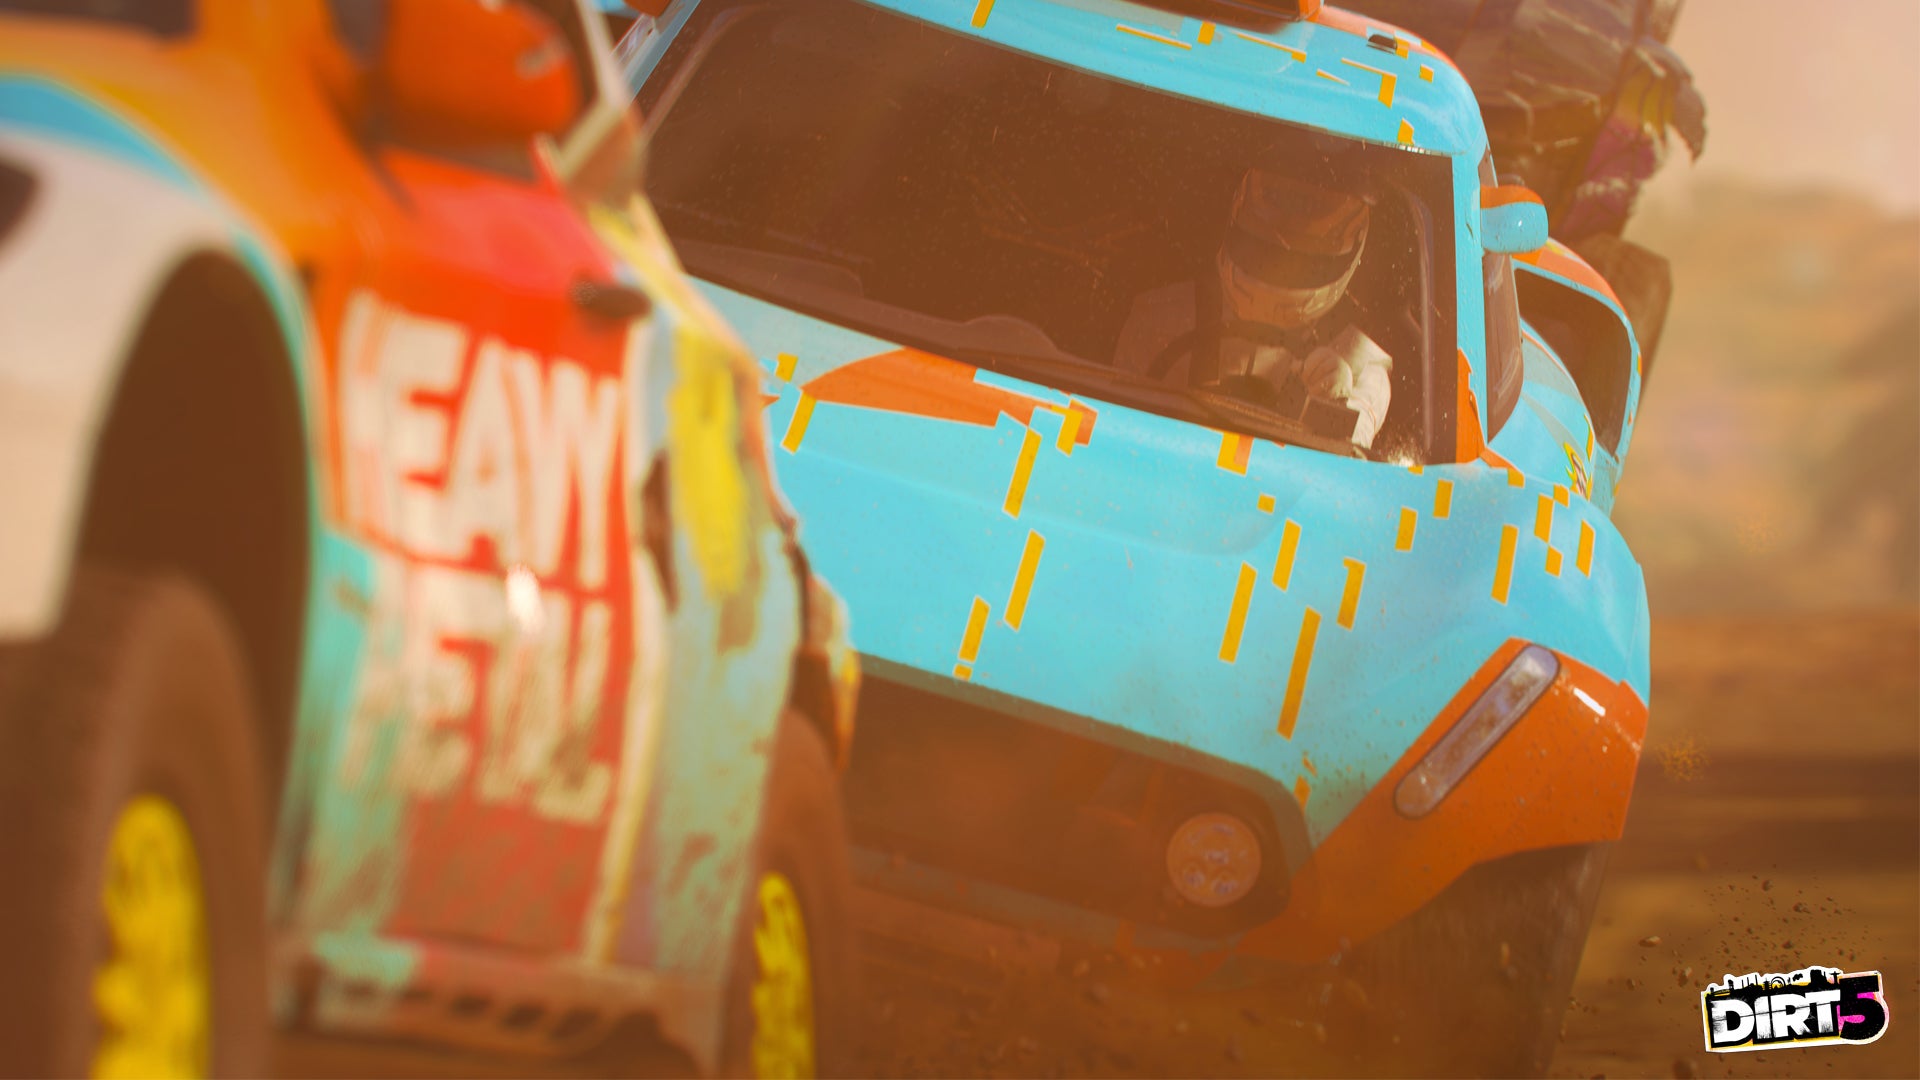 where is the save game located in dirt 3 pc